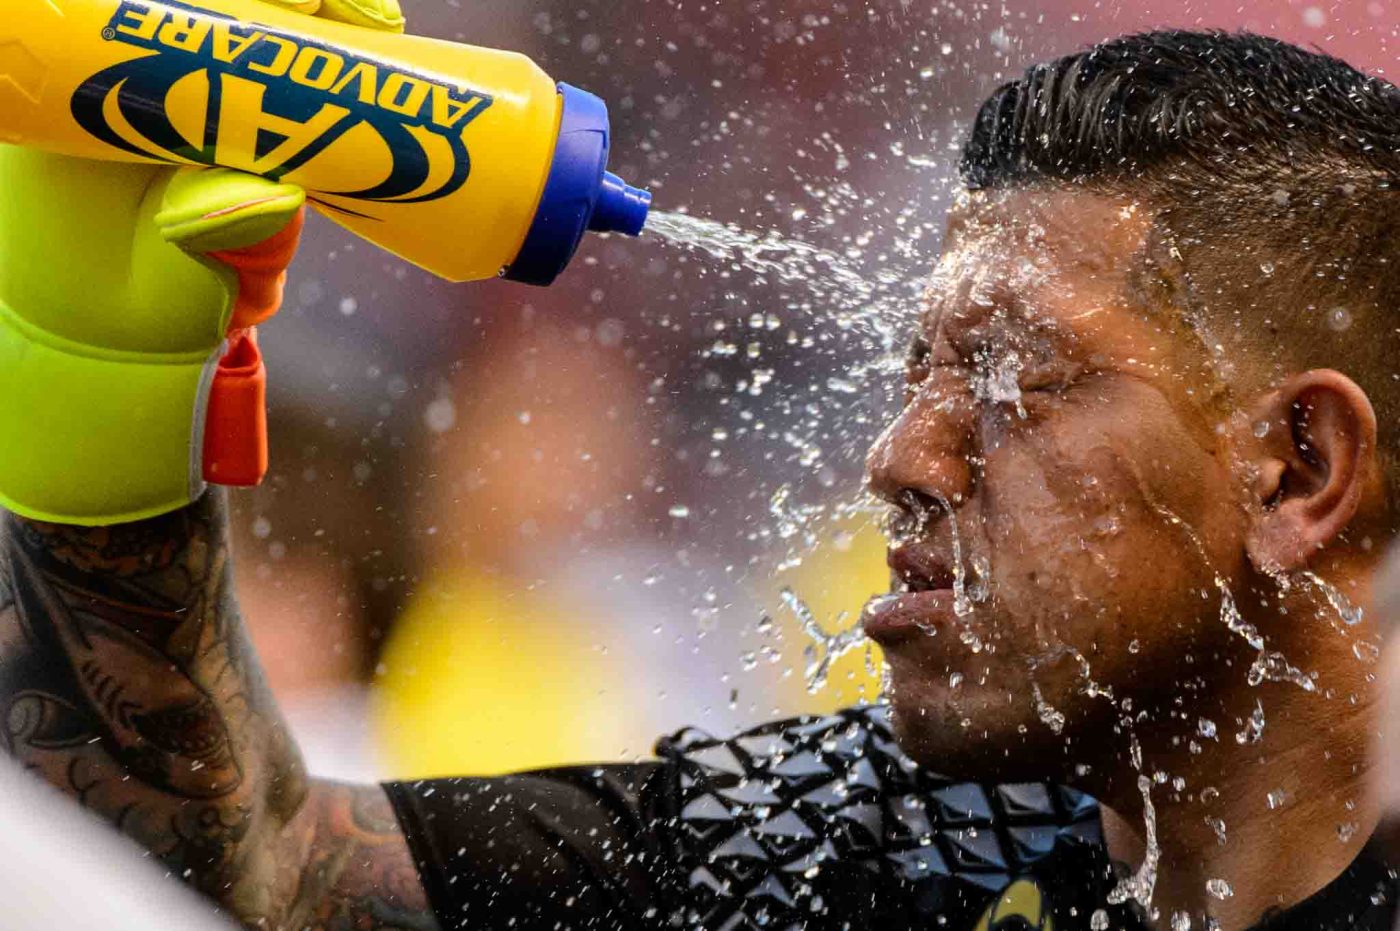 Trent Nelson  |  The Salt Lake Tribune
Real Salt Lake goalkeeper Nick Rimando (18) goes through his pre-game ritual of spraying water on his face as Real Salt Lake hosts the Los Angeles Galaxy, MLS soccer at Rio Tinto Stadium in Sandy, Wednesday September 7, 2016.